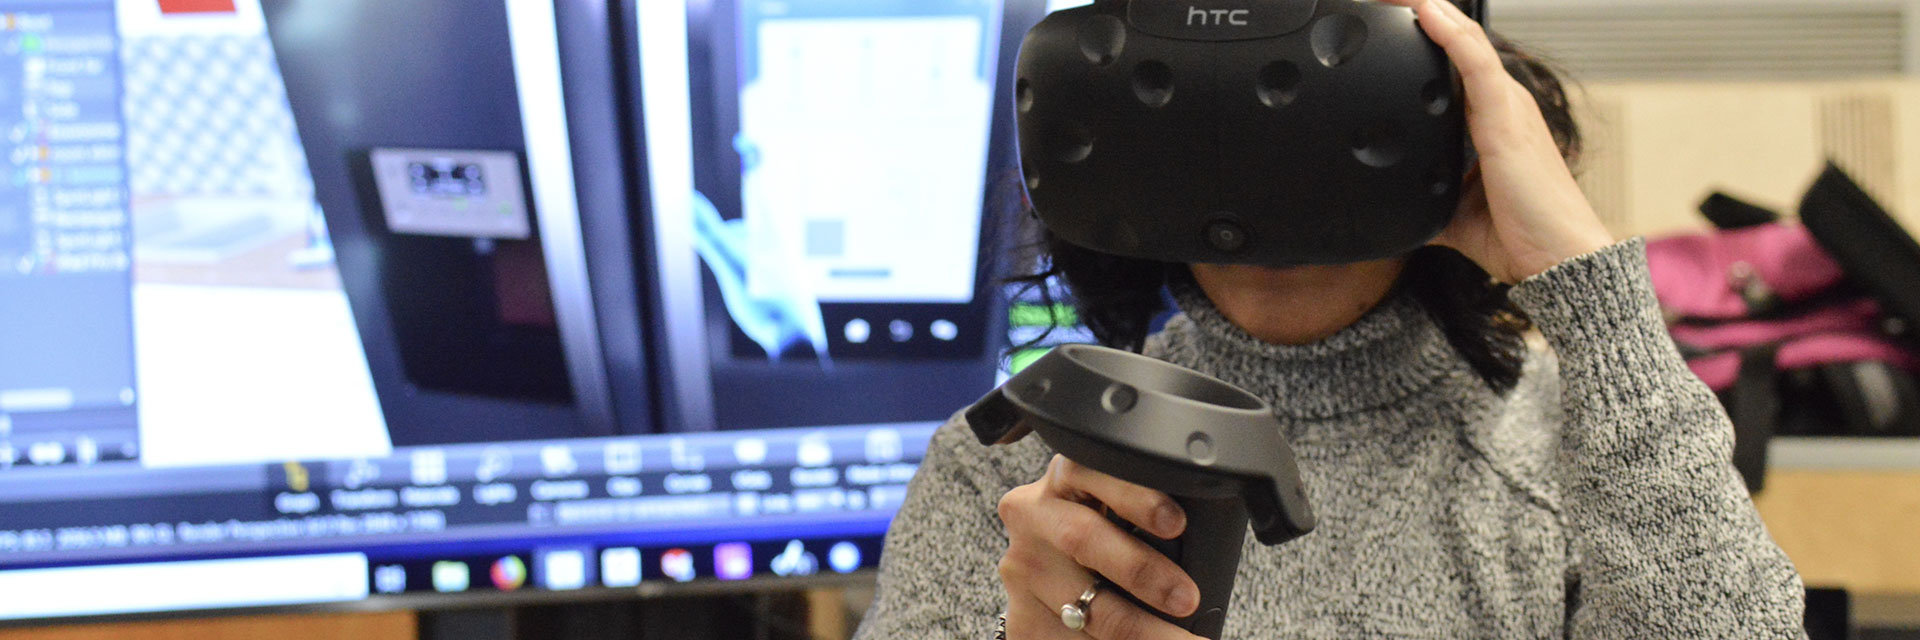 An industrial design student wears a VR headset and uses a joystick.